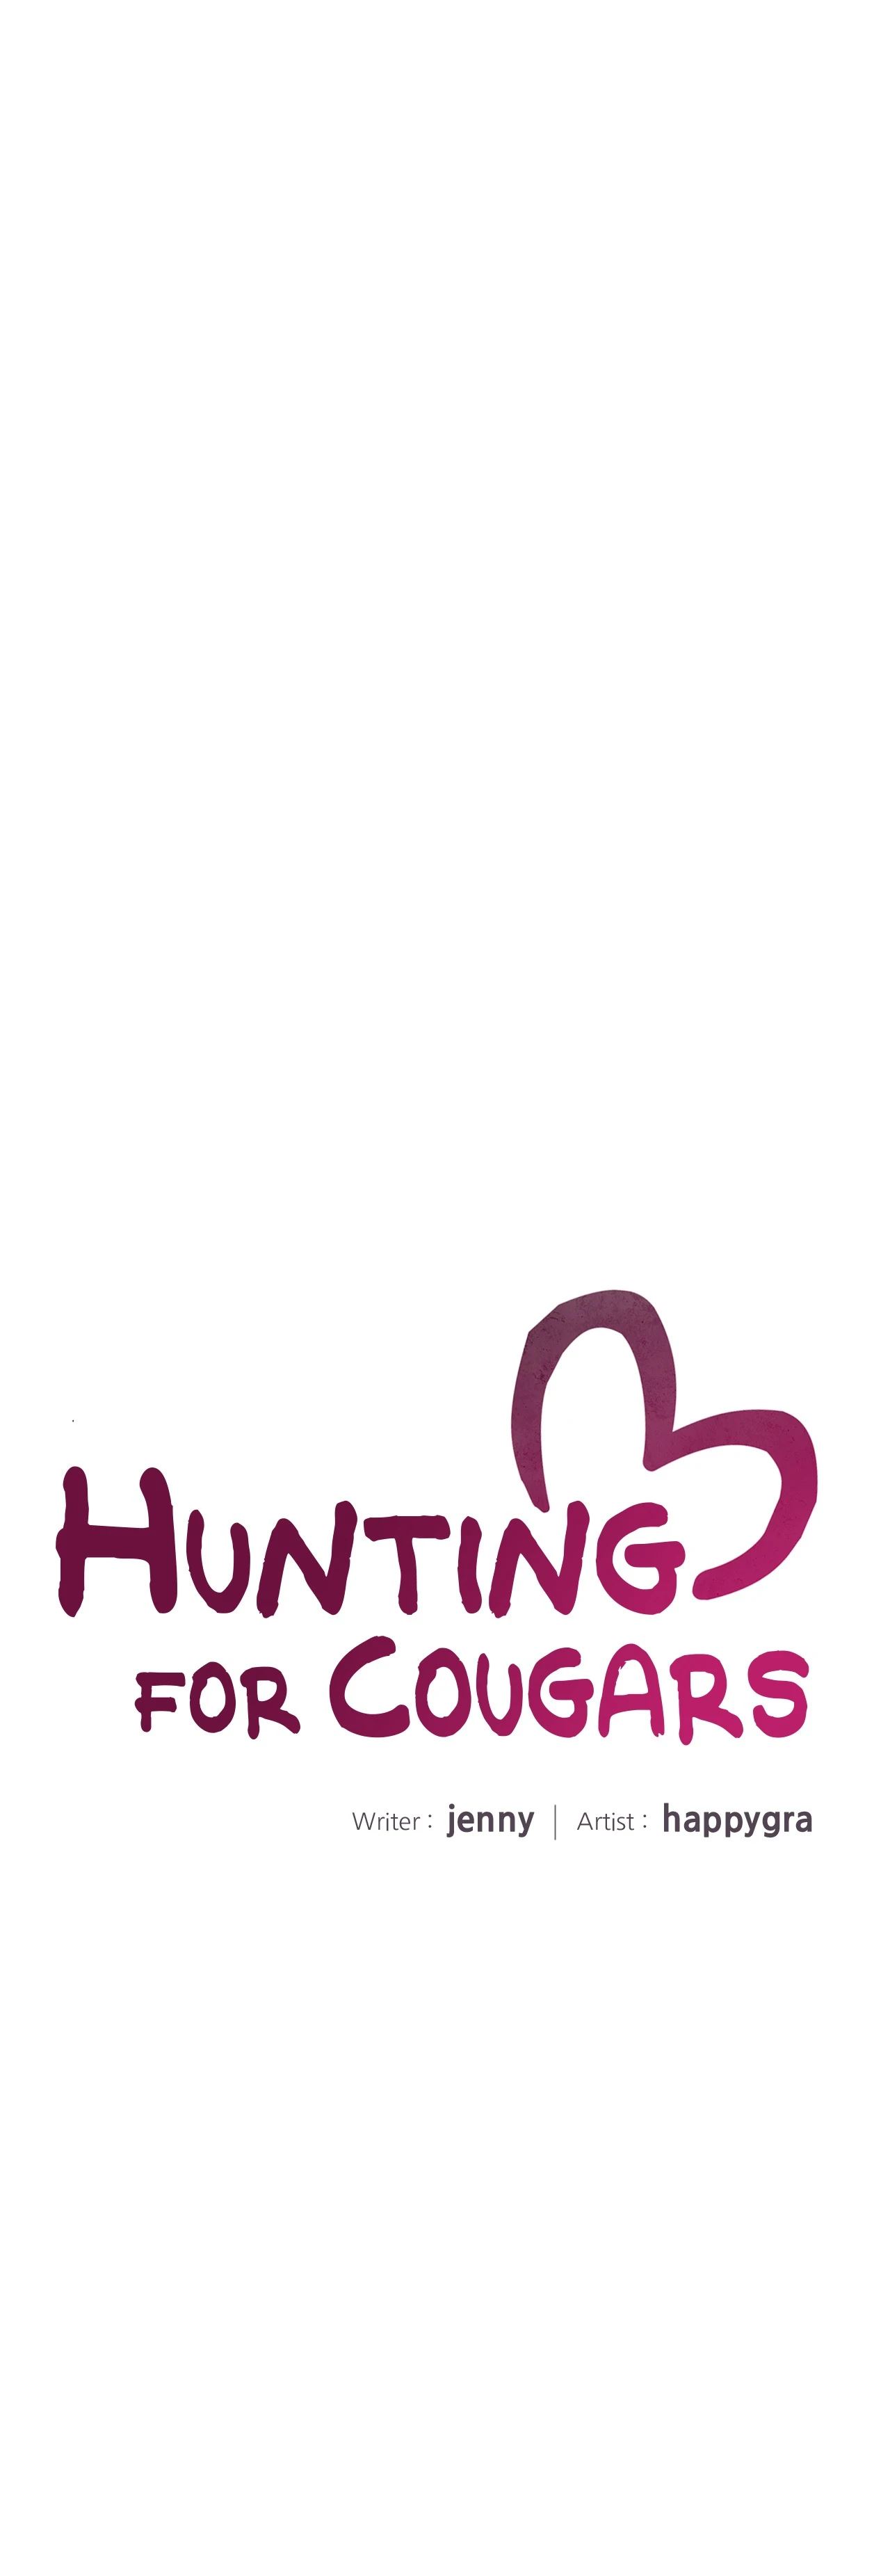 Hunting for Cougars NEW image